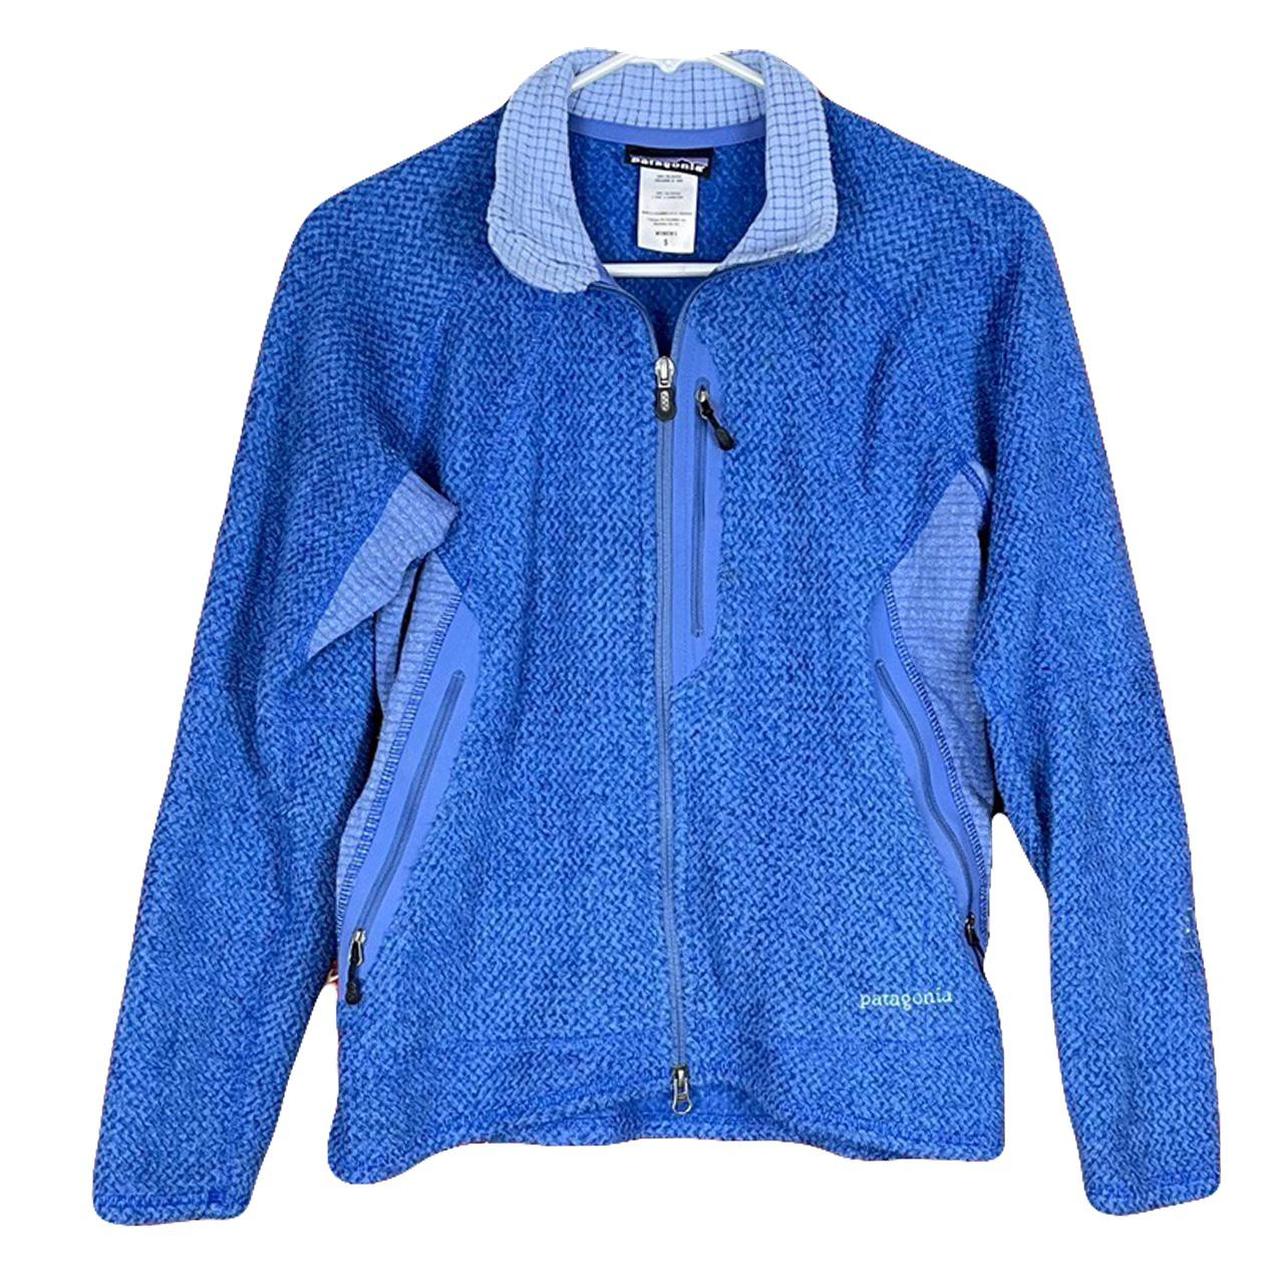 Patagonia Women's Blue and Purple Jacket